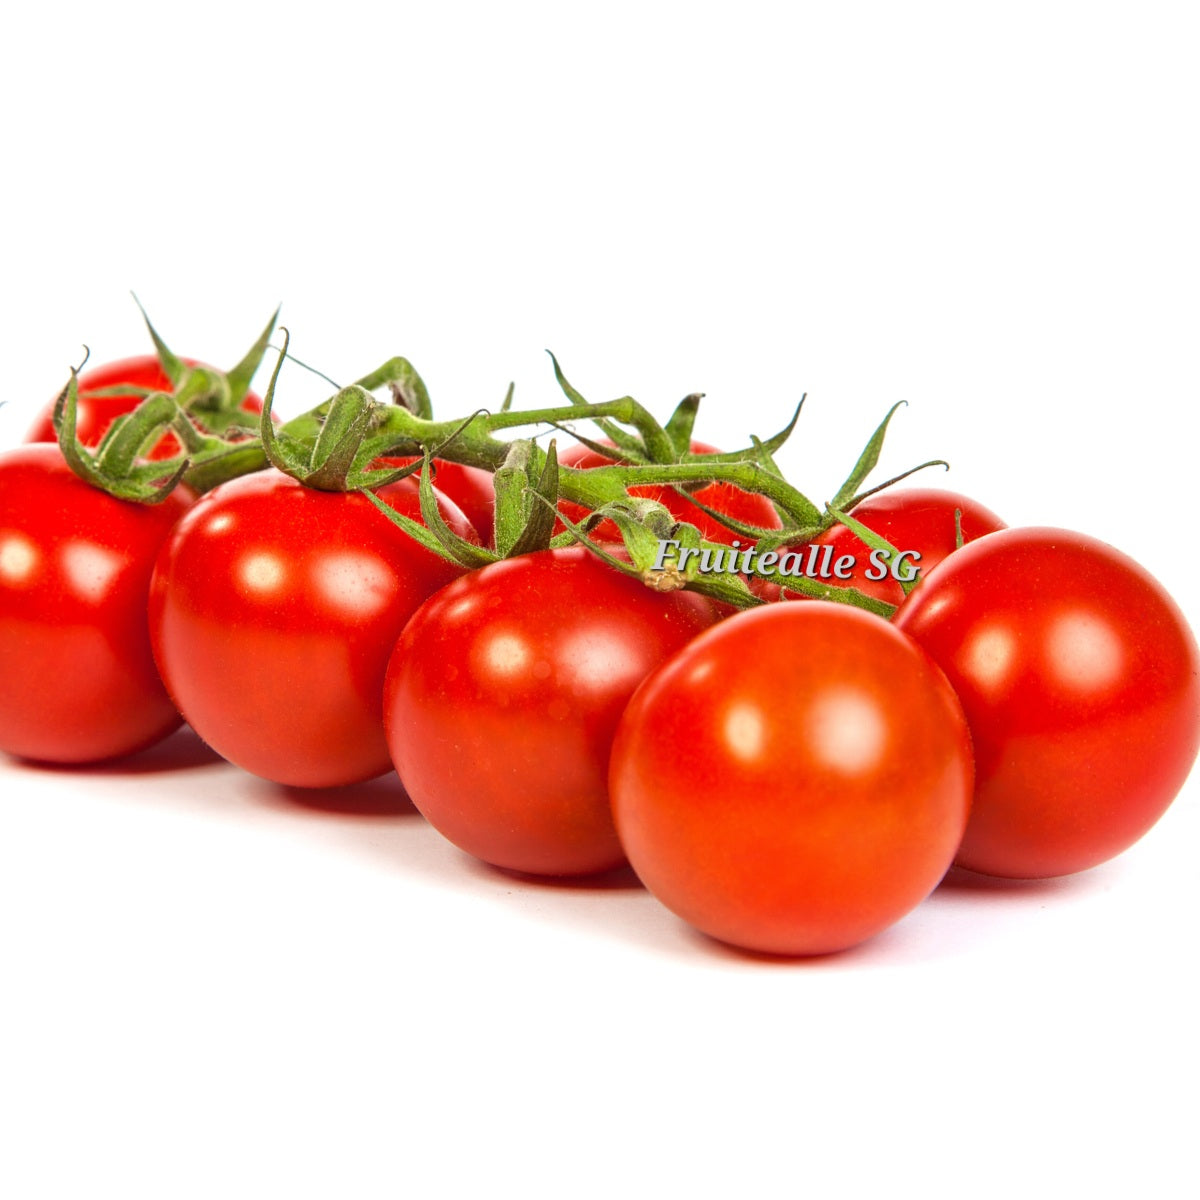 Tomato - Cherry Tomato on Vine | From Holland